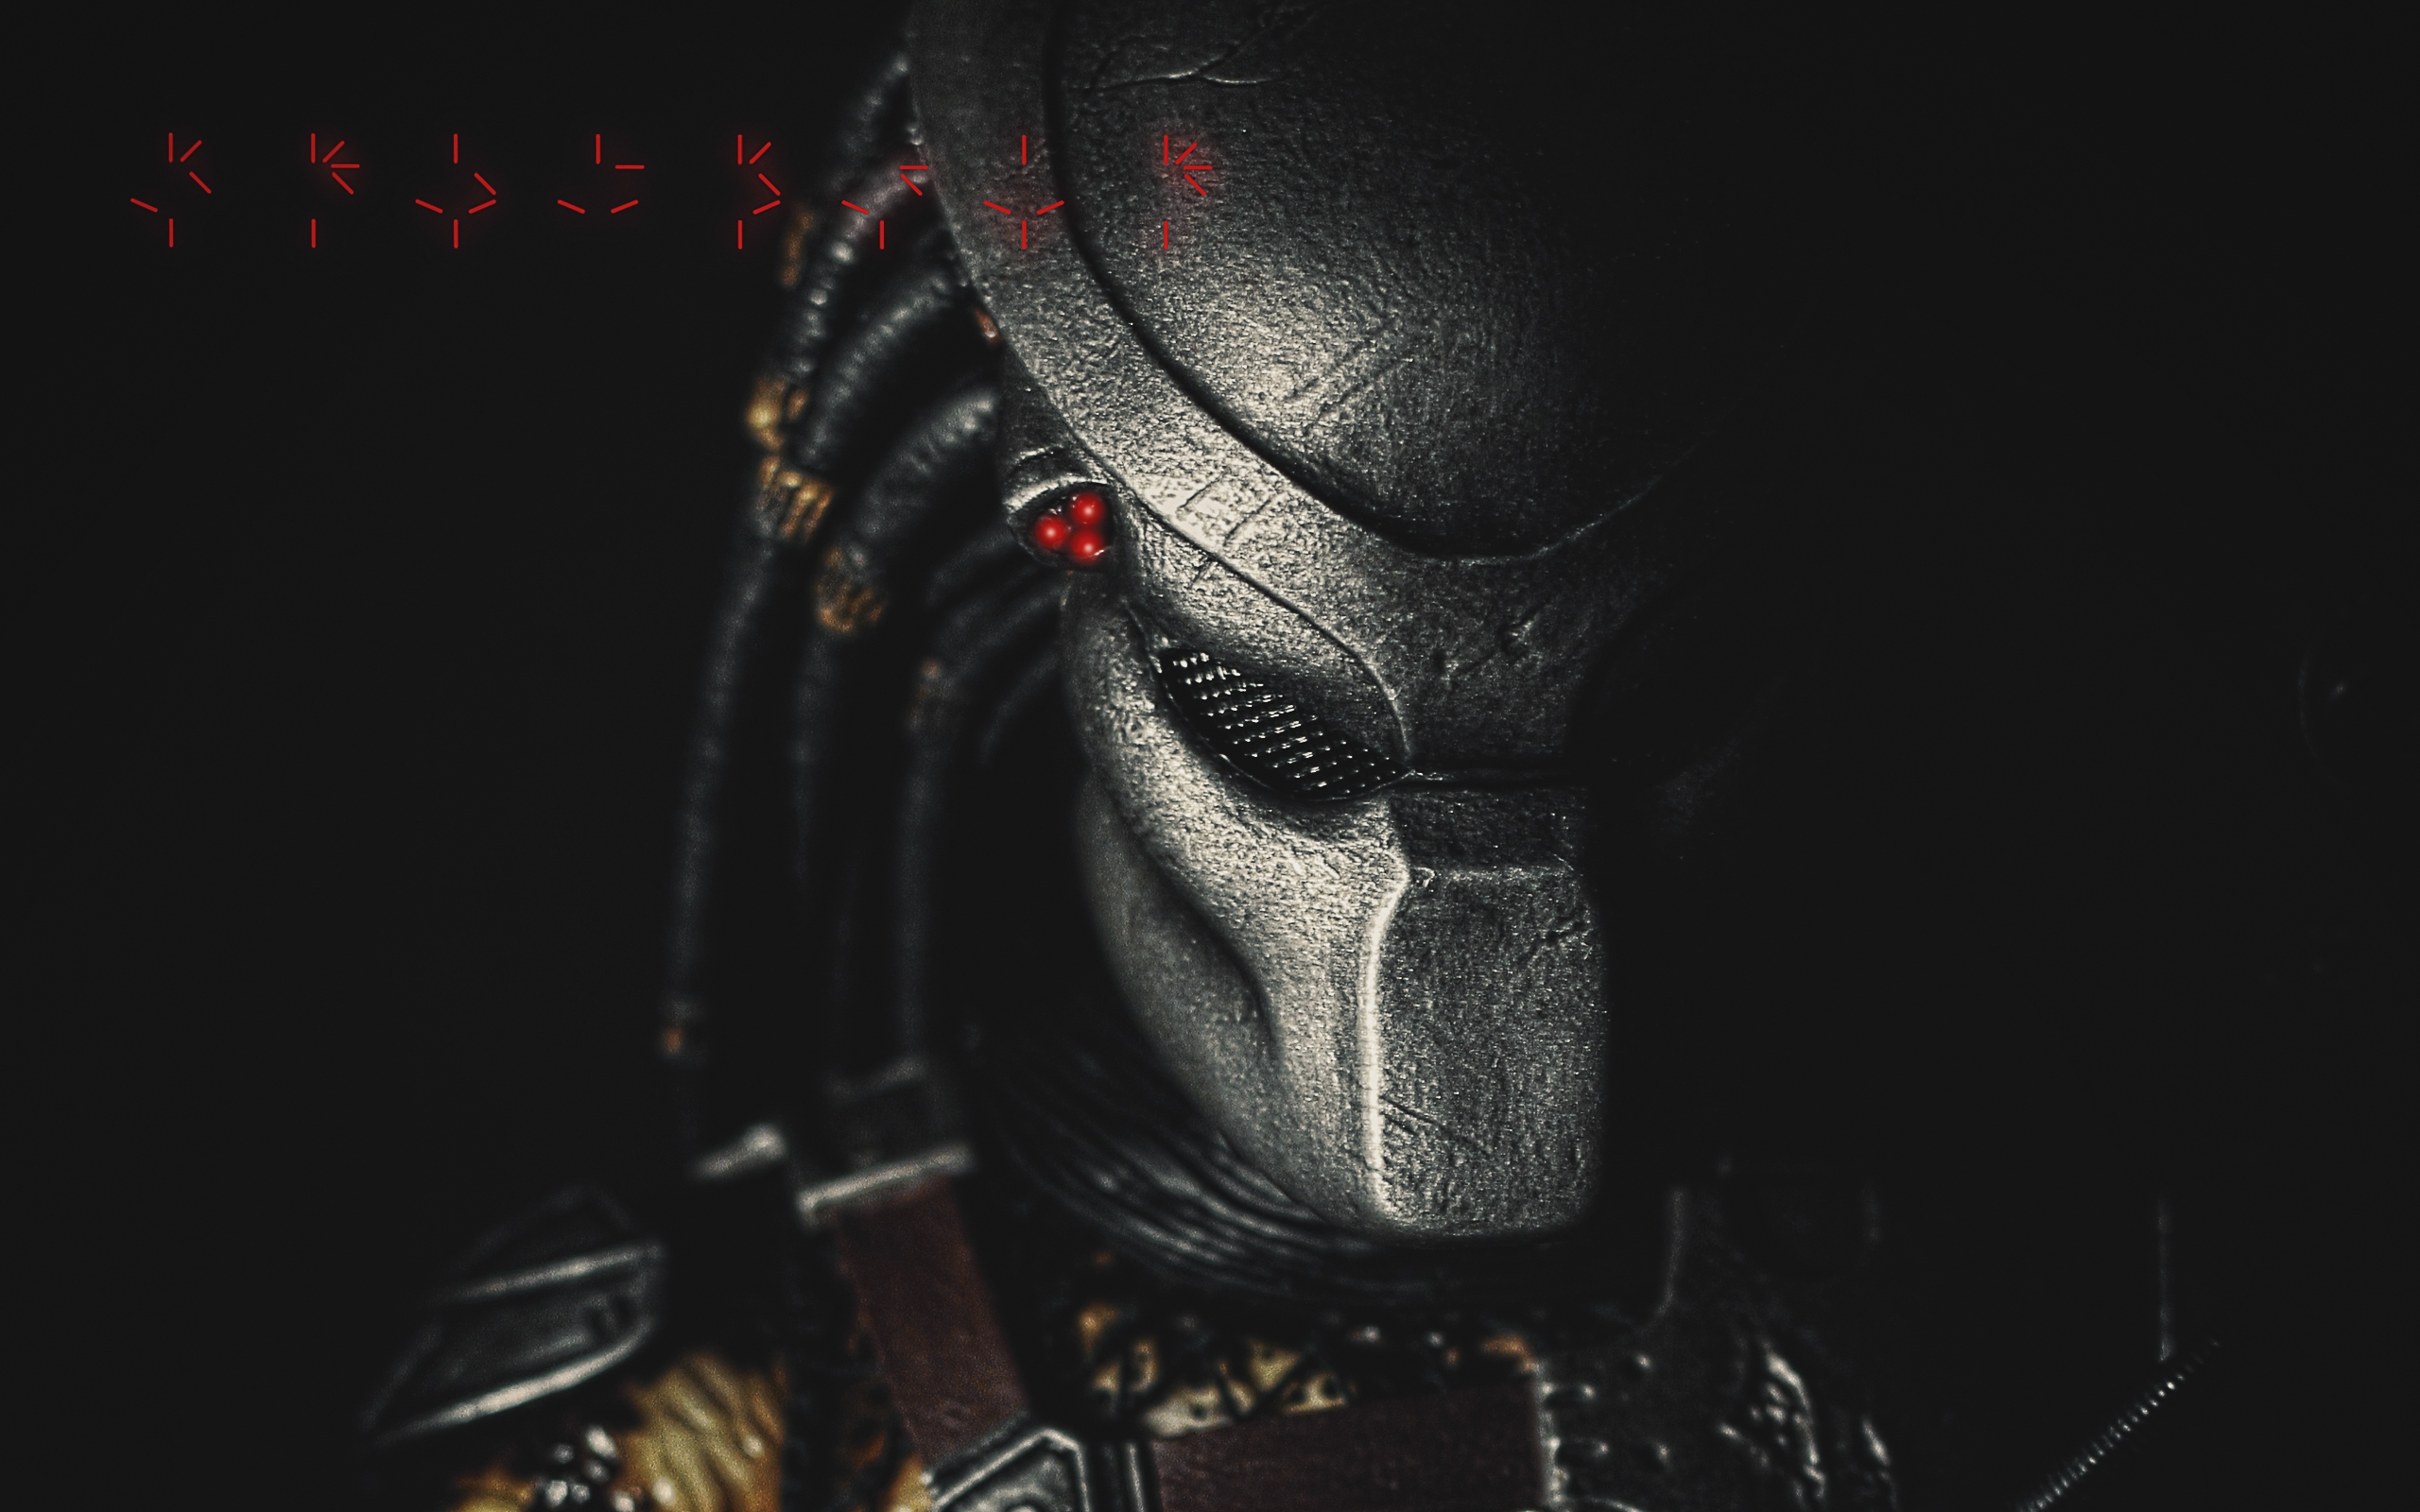 Predator 4K wallpapers for your desktop or mobile screen free and easy to download